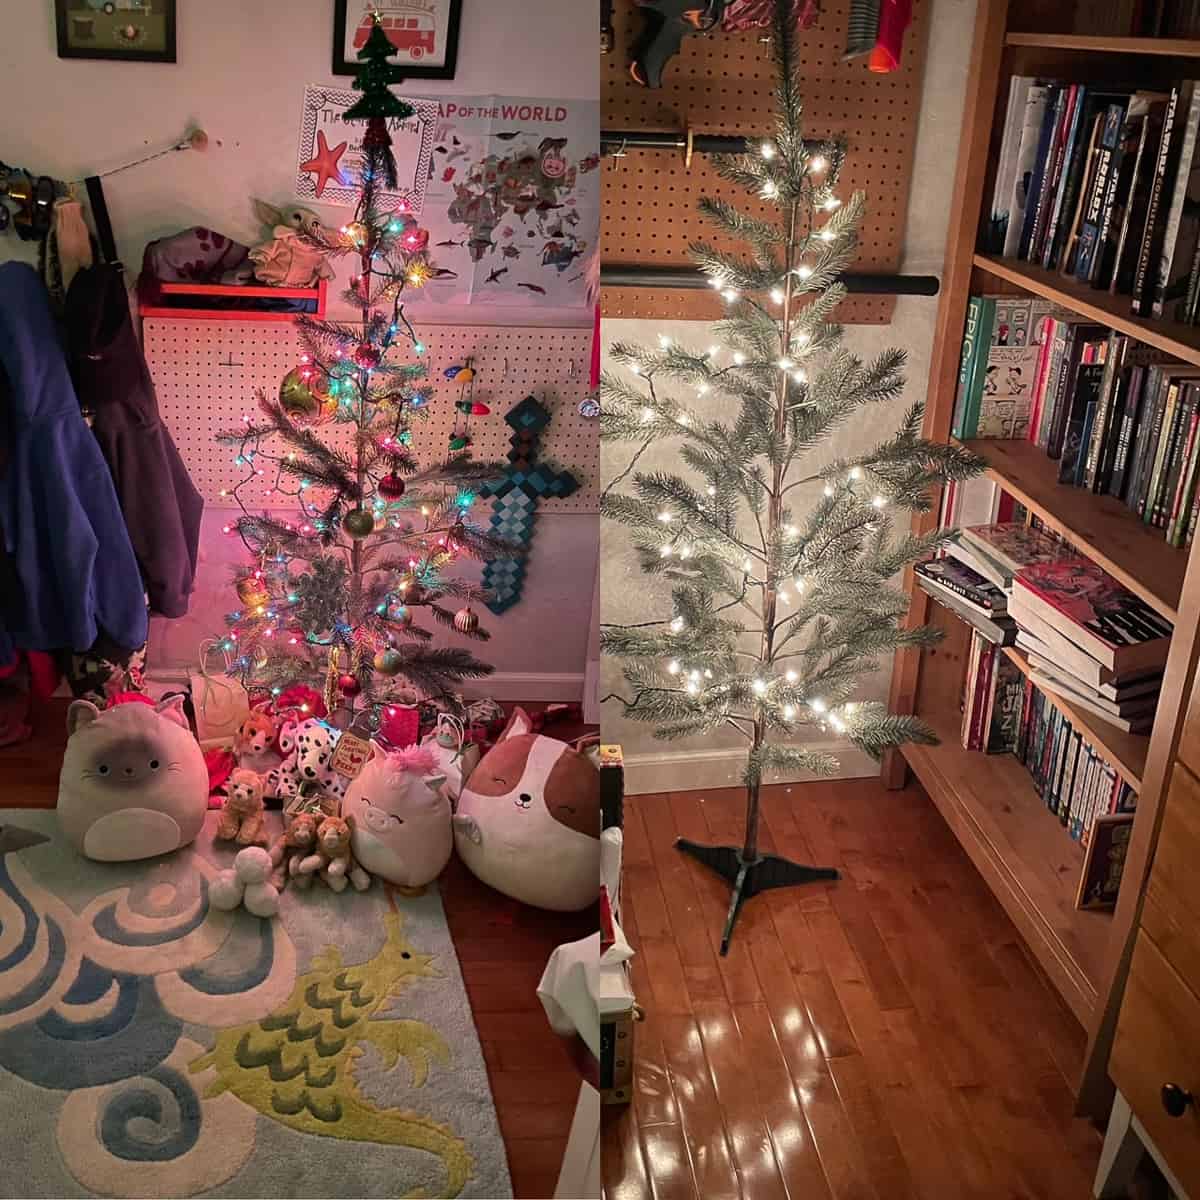 2 small Christmas trees - one has colorful lights and is heavily decorated and the other only has white lights on it.